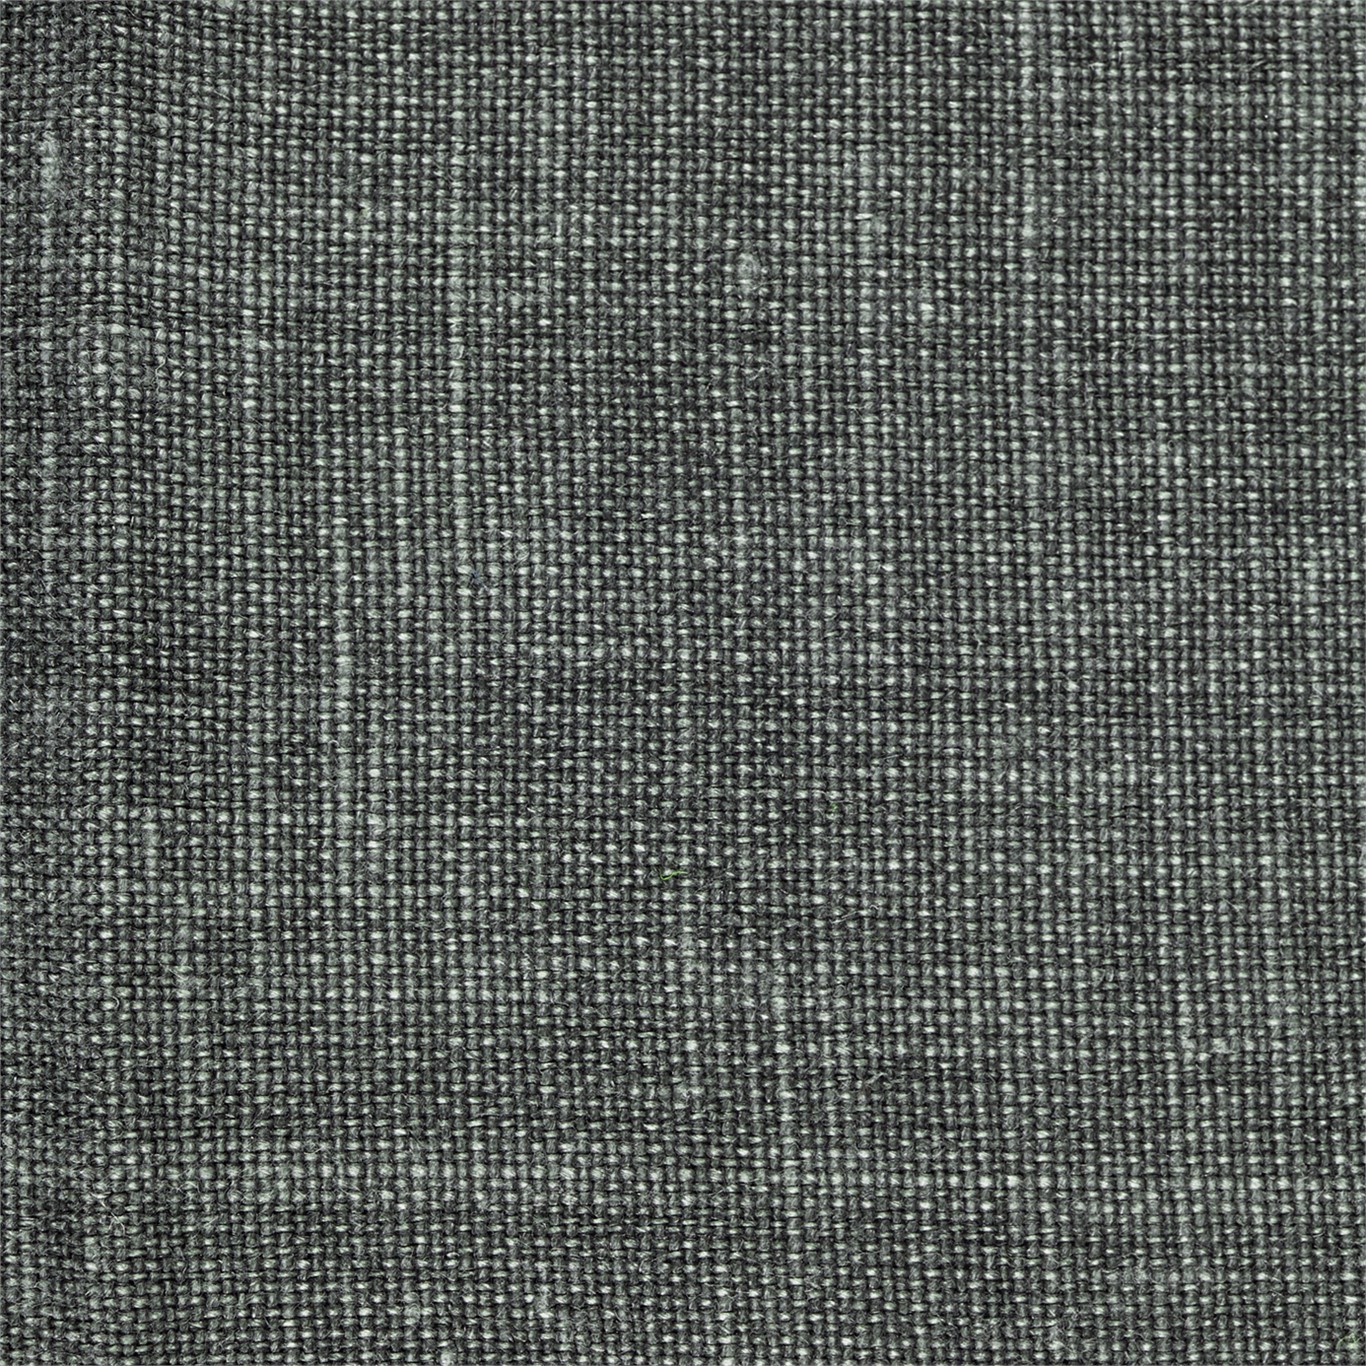 Cybele Graphite Fabric by ZOF